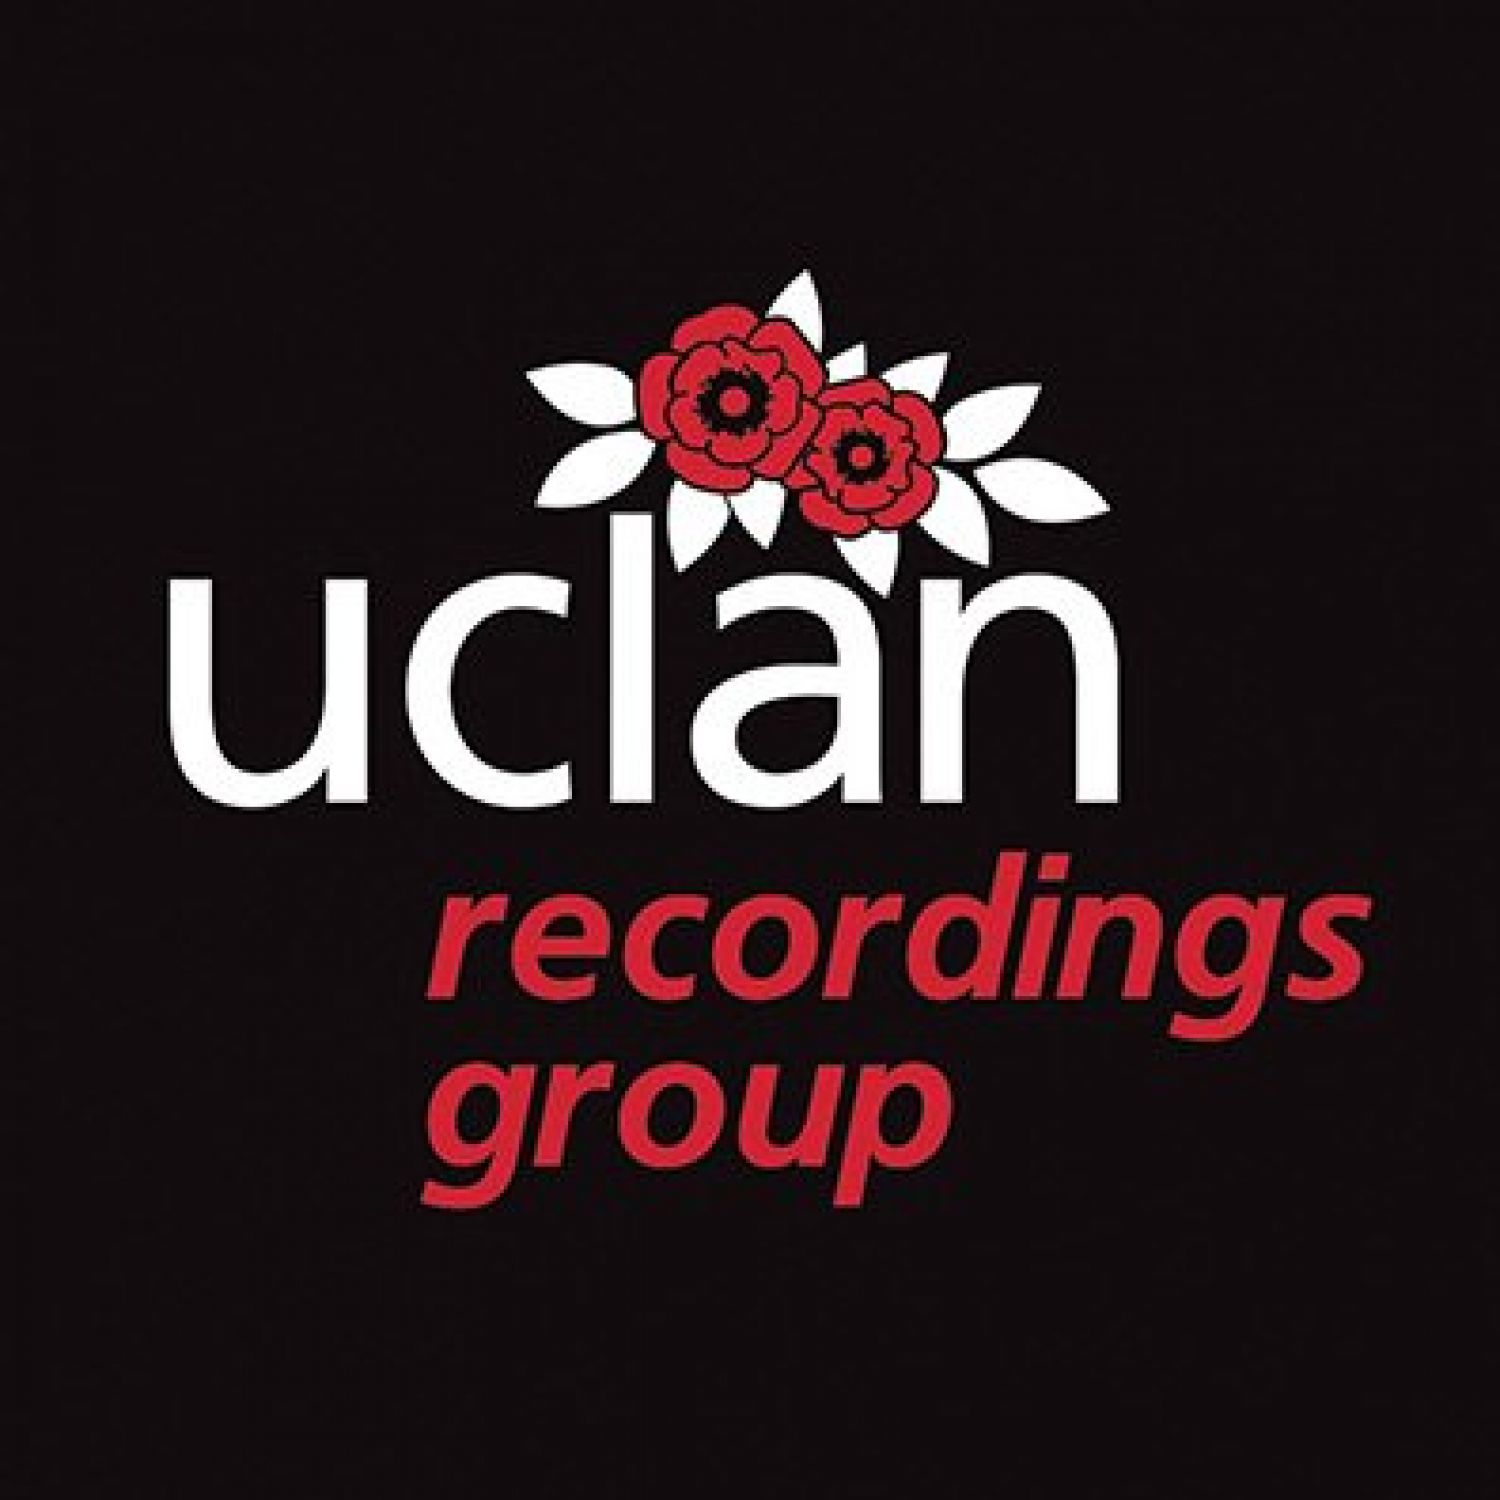 UCLAN Record Label Helps Local Musicians